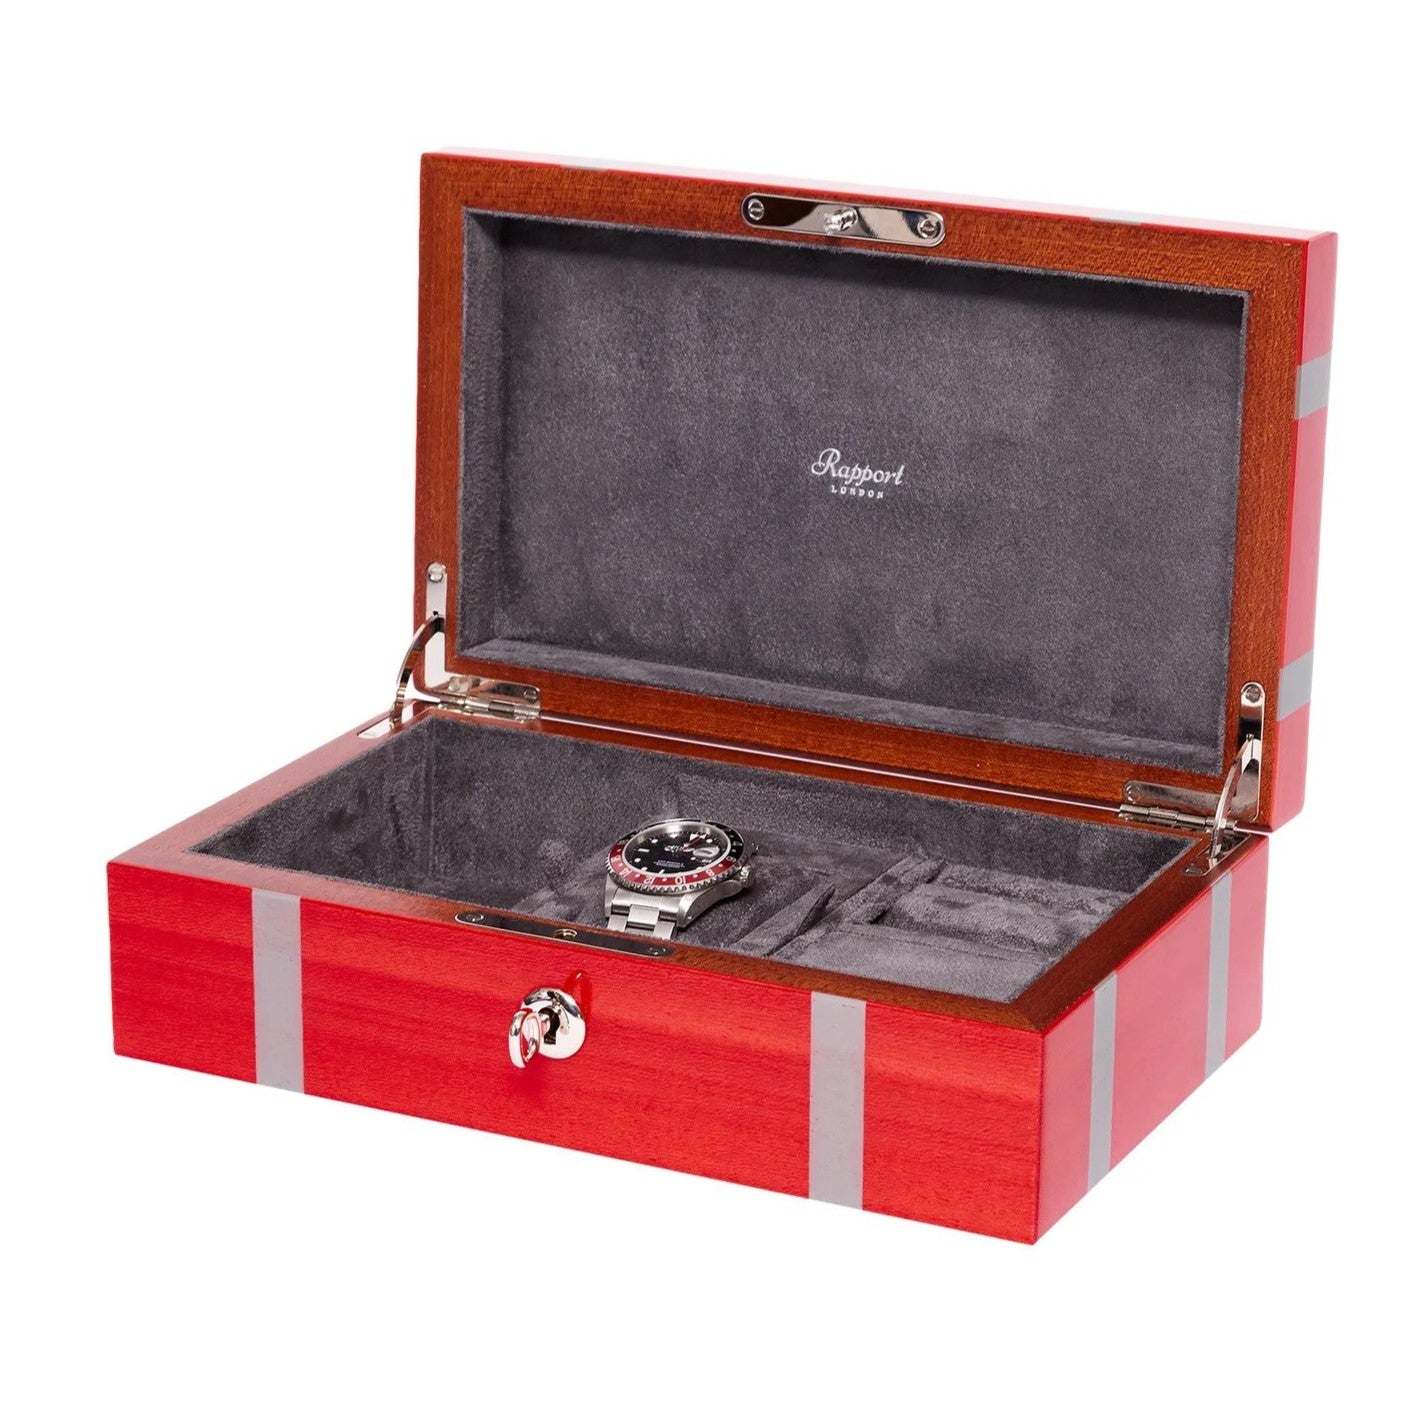 Rapport - Carnaby Multi-Storage Watch Box in Red Lacquer | J167